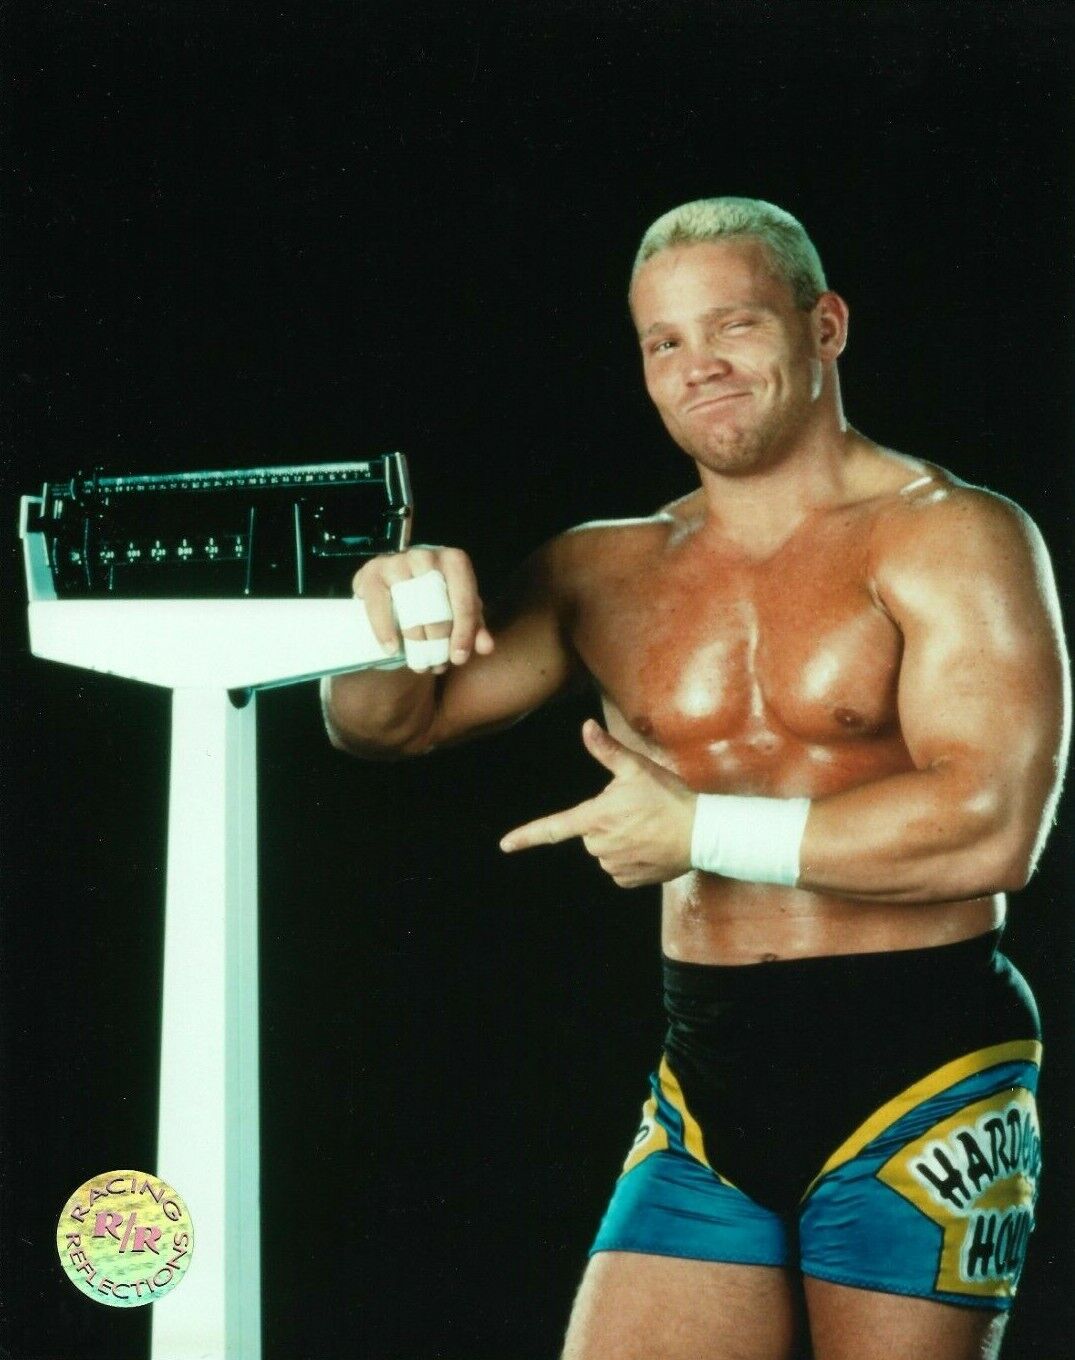 WWE CRASH HOLLY OFFICIAL LICENSED ORIGINAL R/R RACING AND REFLECTIONS 8X10 Photo Poster painting